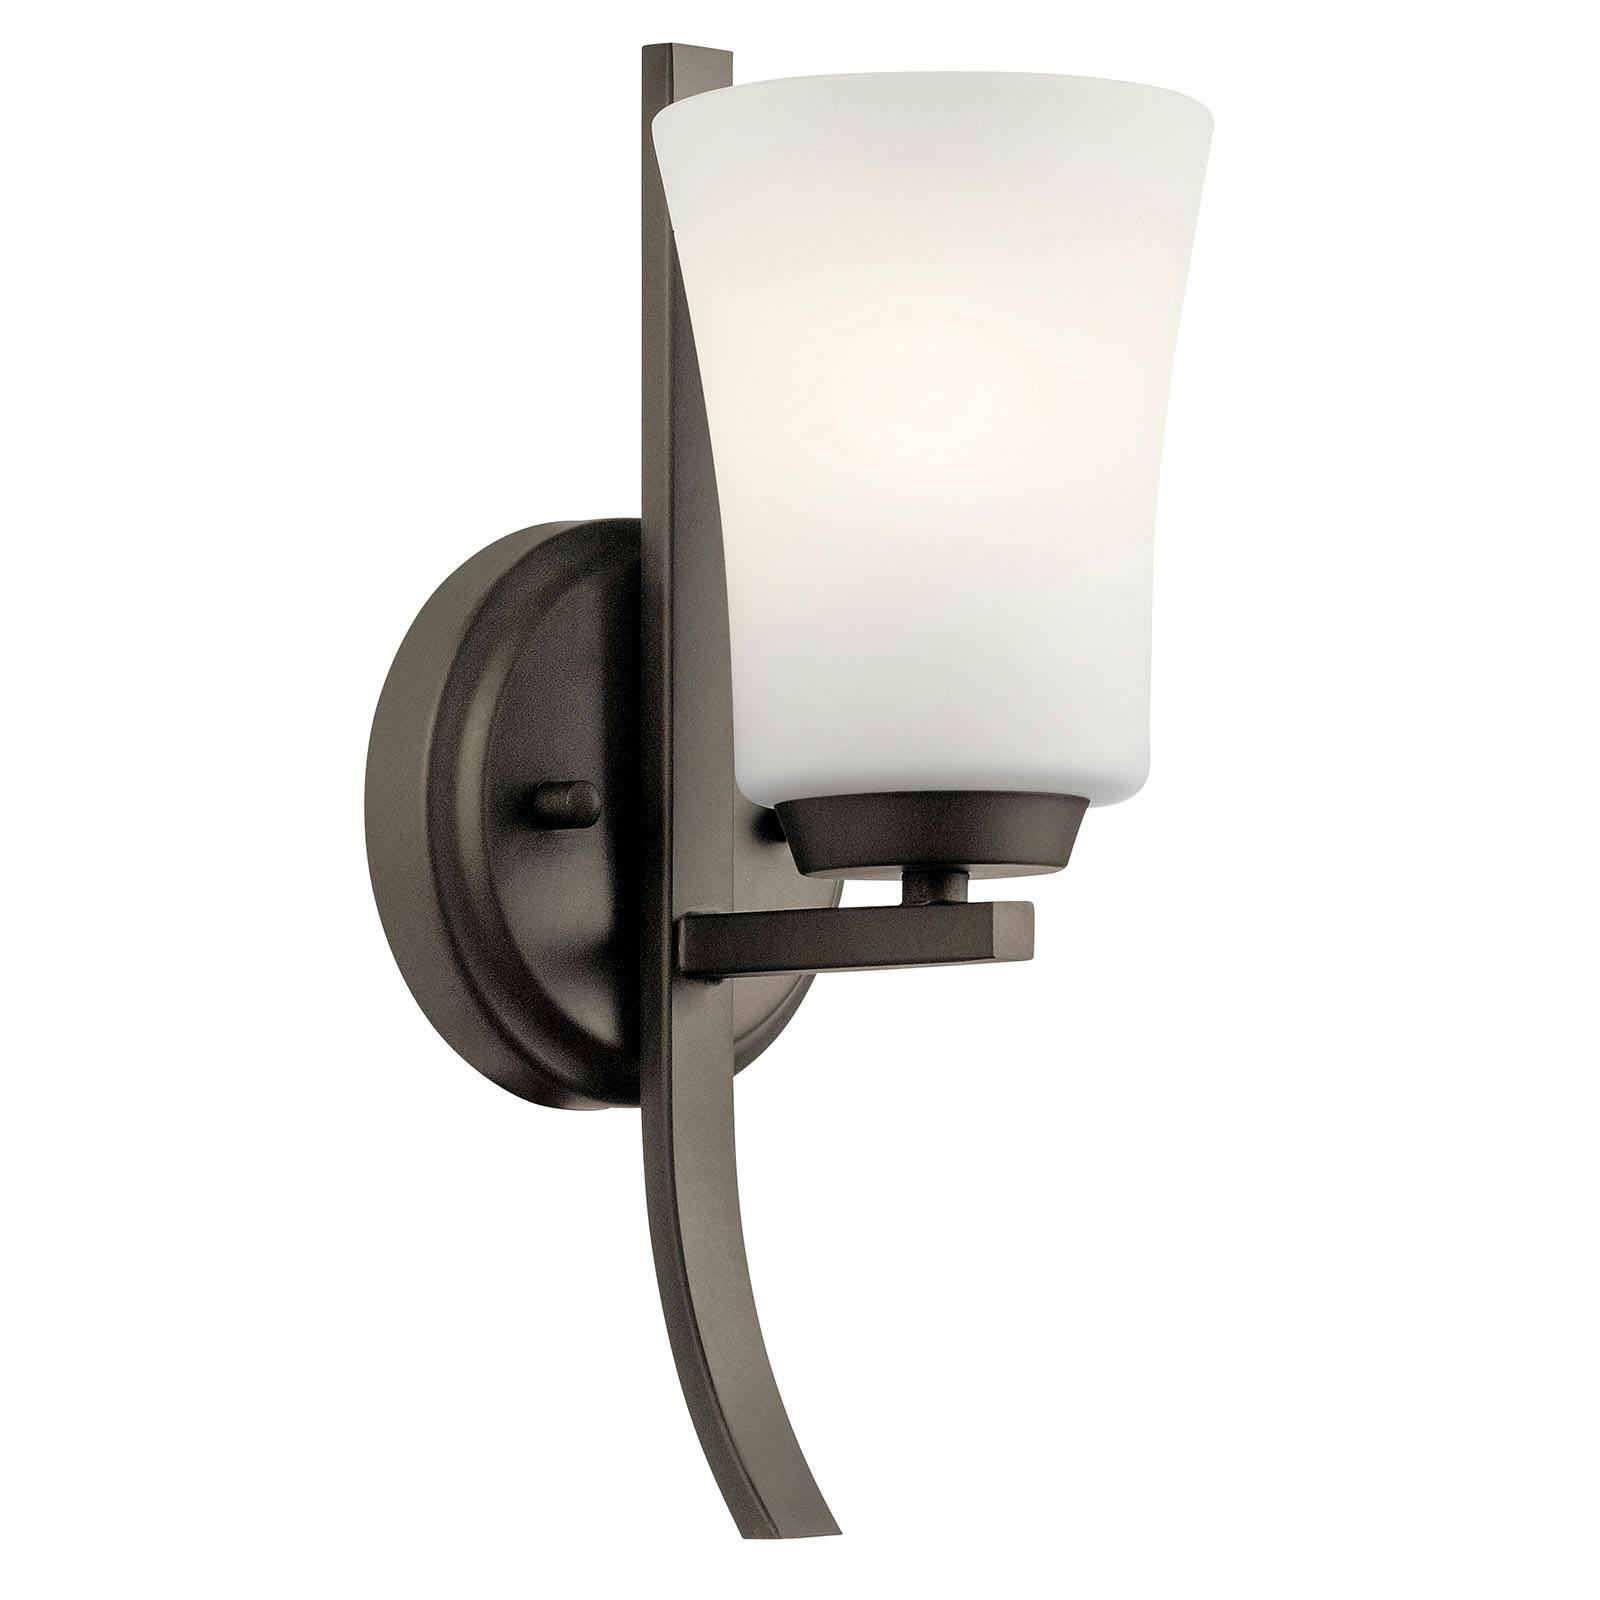 Tao 1 Light Wall Sconce Olde Bronze® on a white background